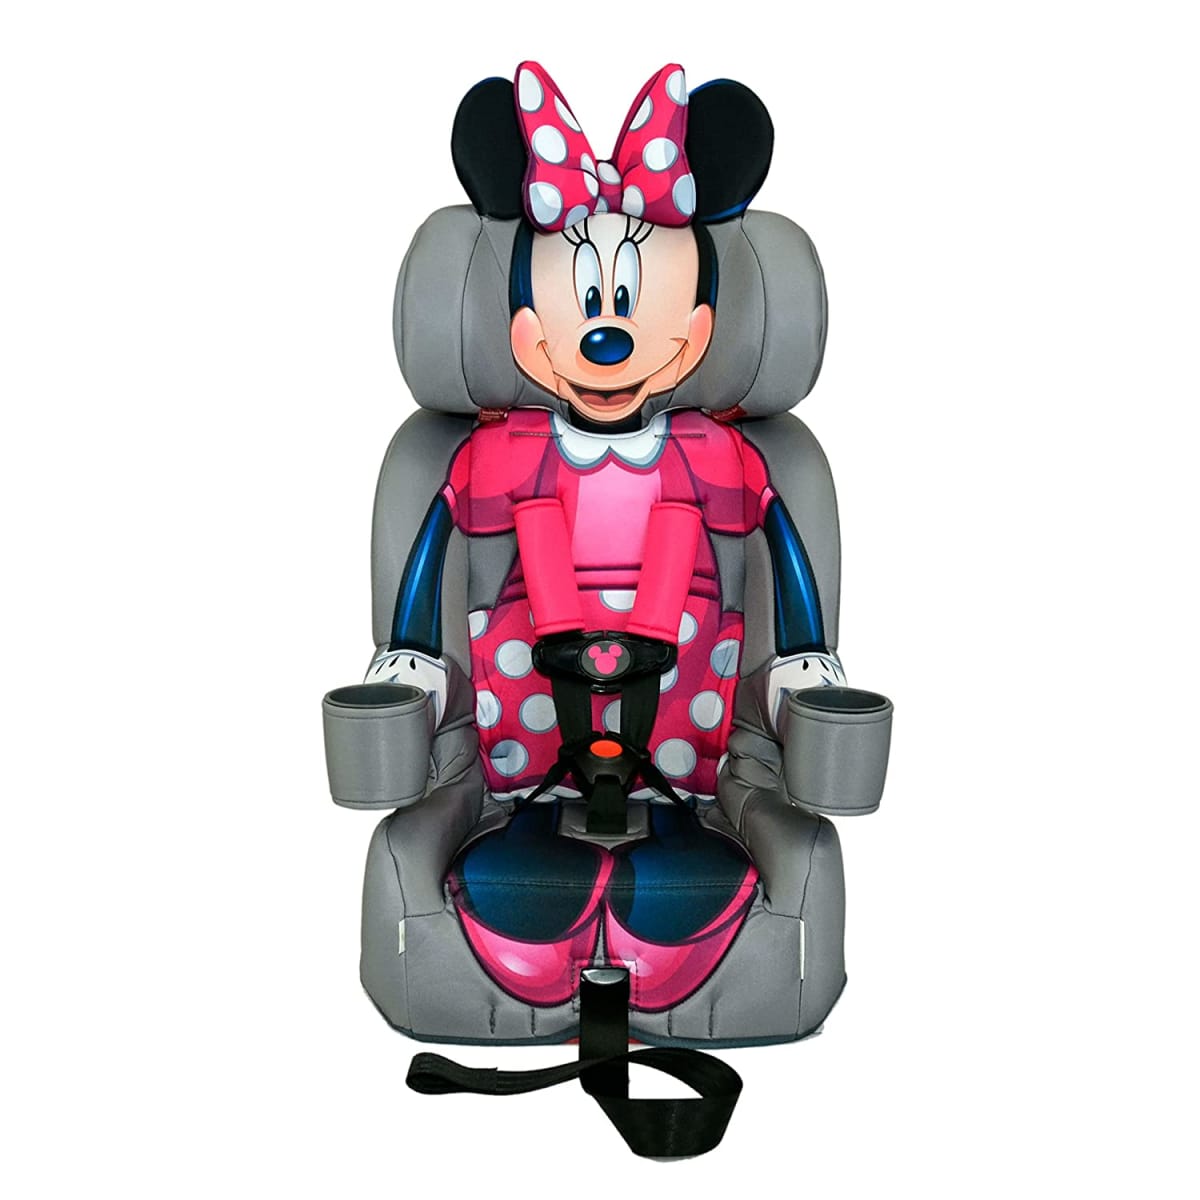 Disney Minnie Mouse 2-in-1 Forward-Facing Booster Car Seat